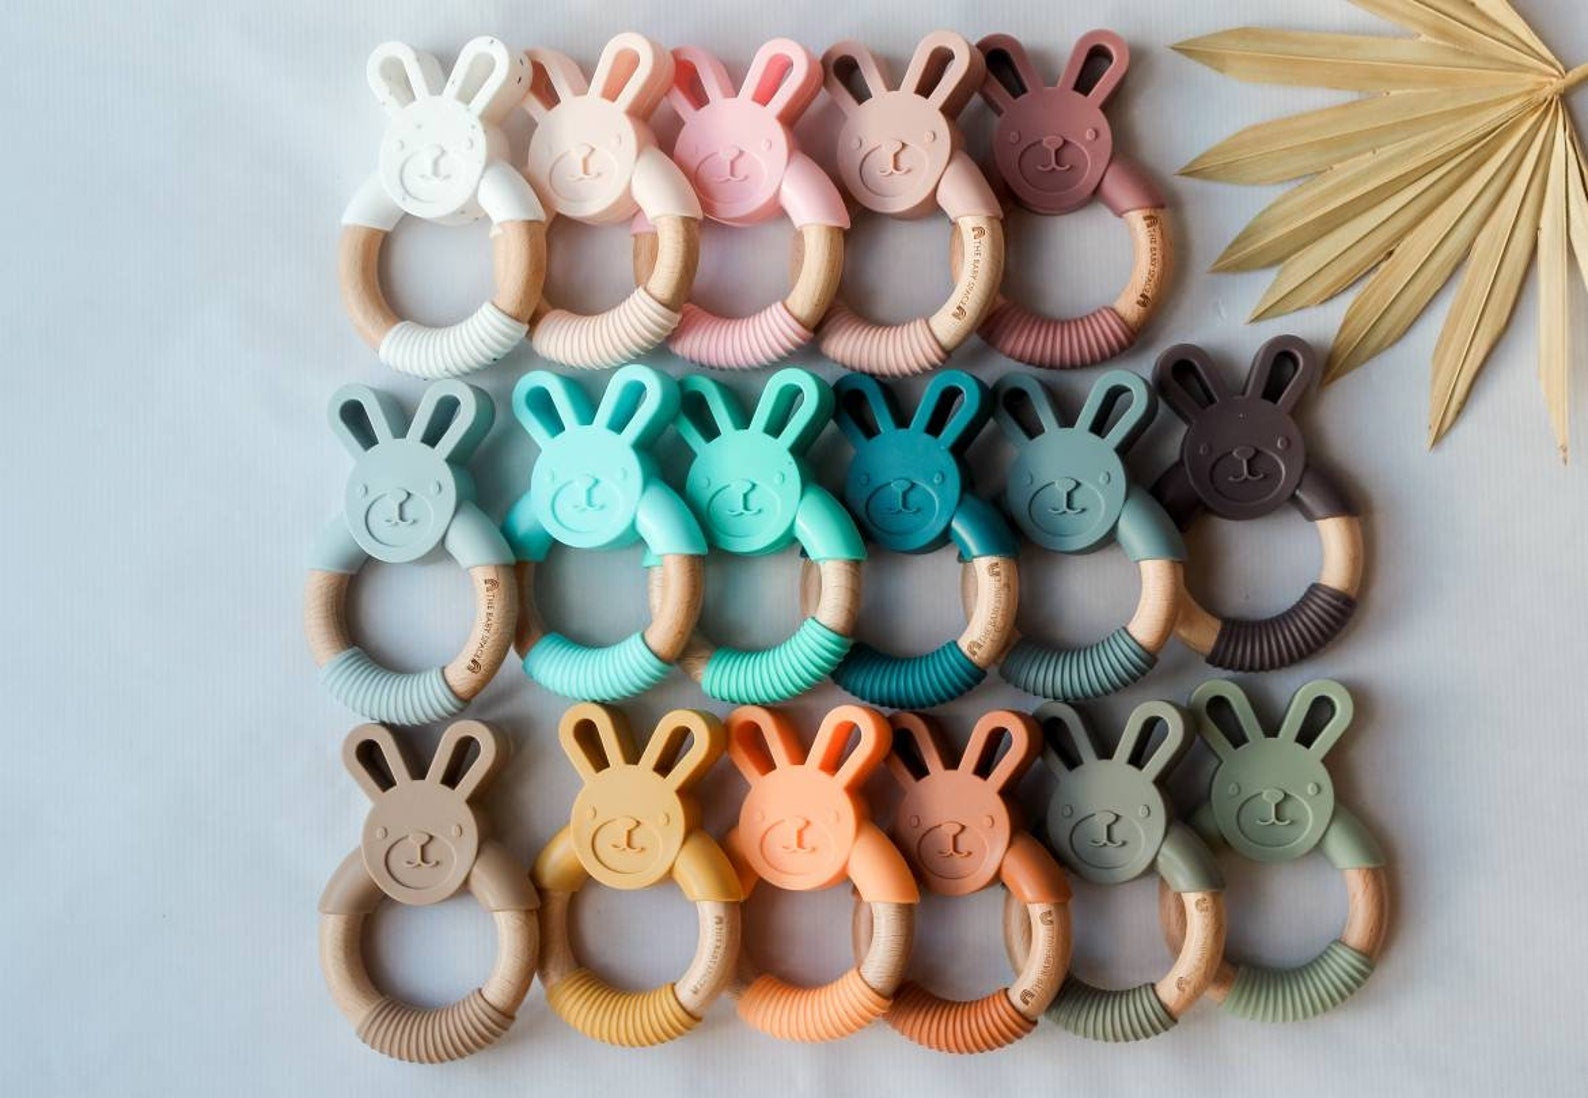 The silicone and wood bunny rings in various colors